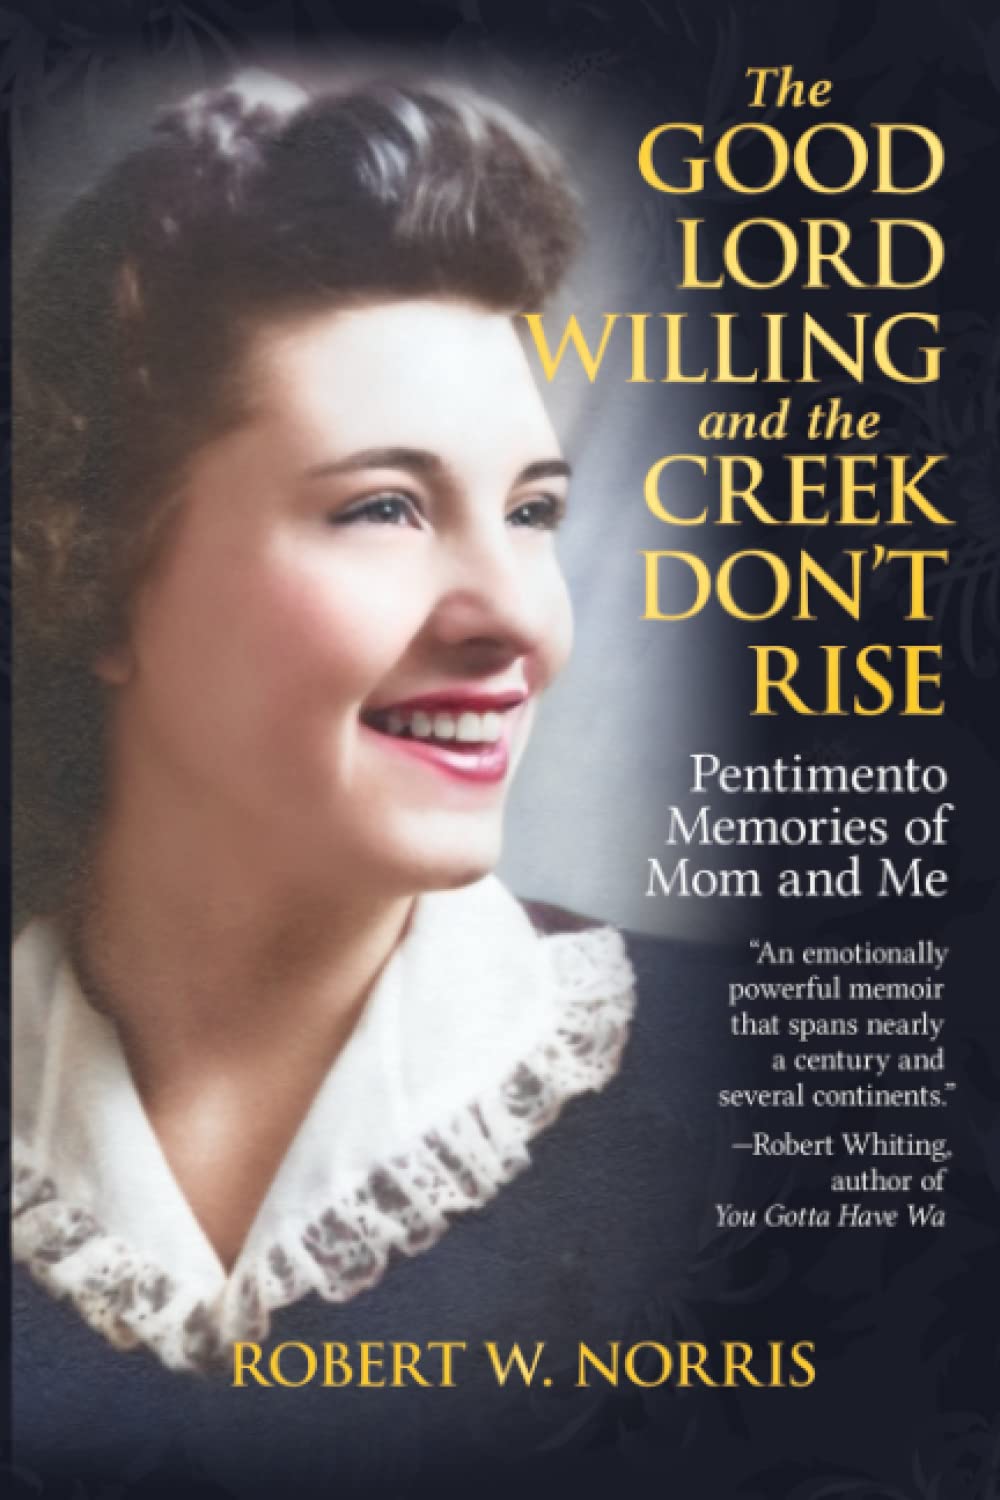 The Good Lord Willing and the Creek Don’t Rise: Pentimento Memories of Mom and Me